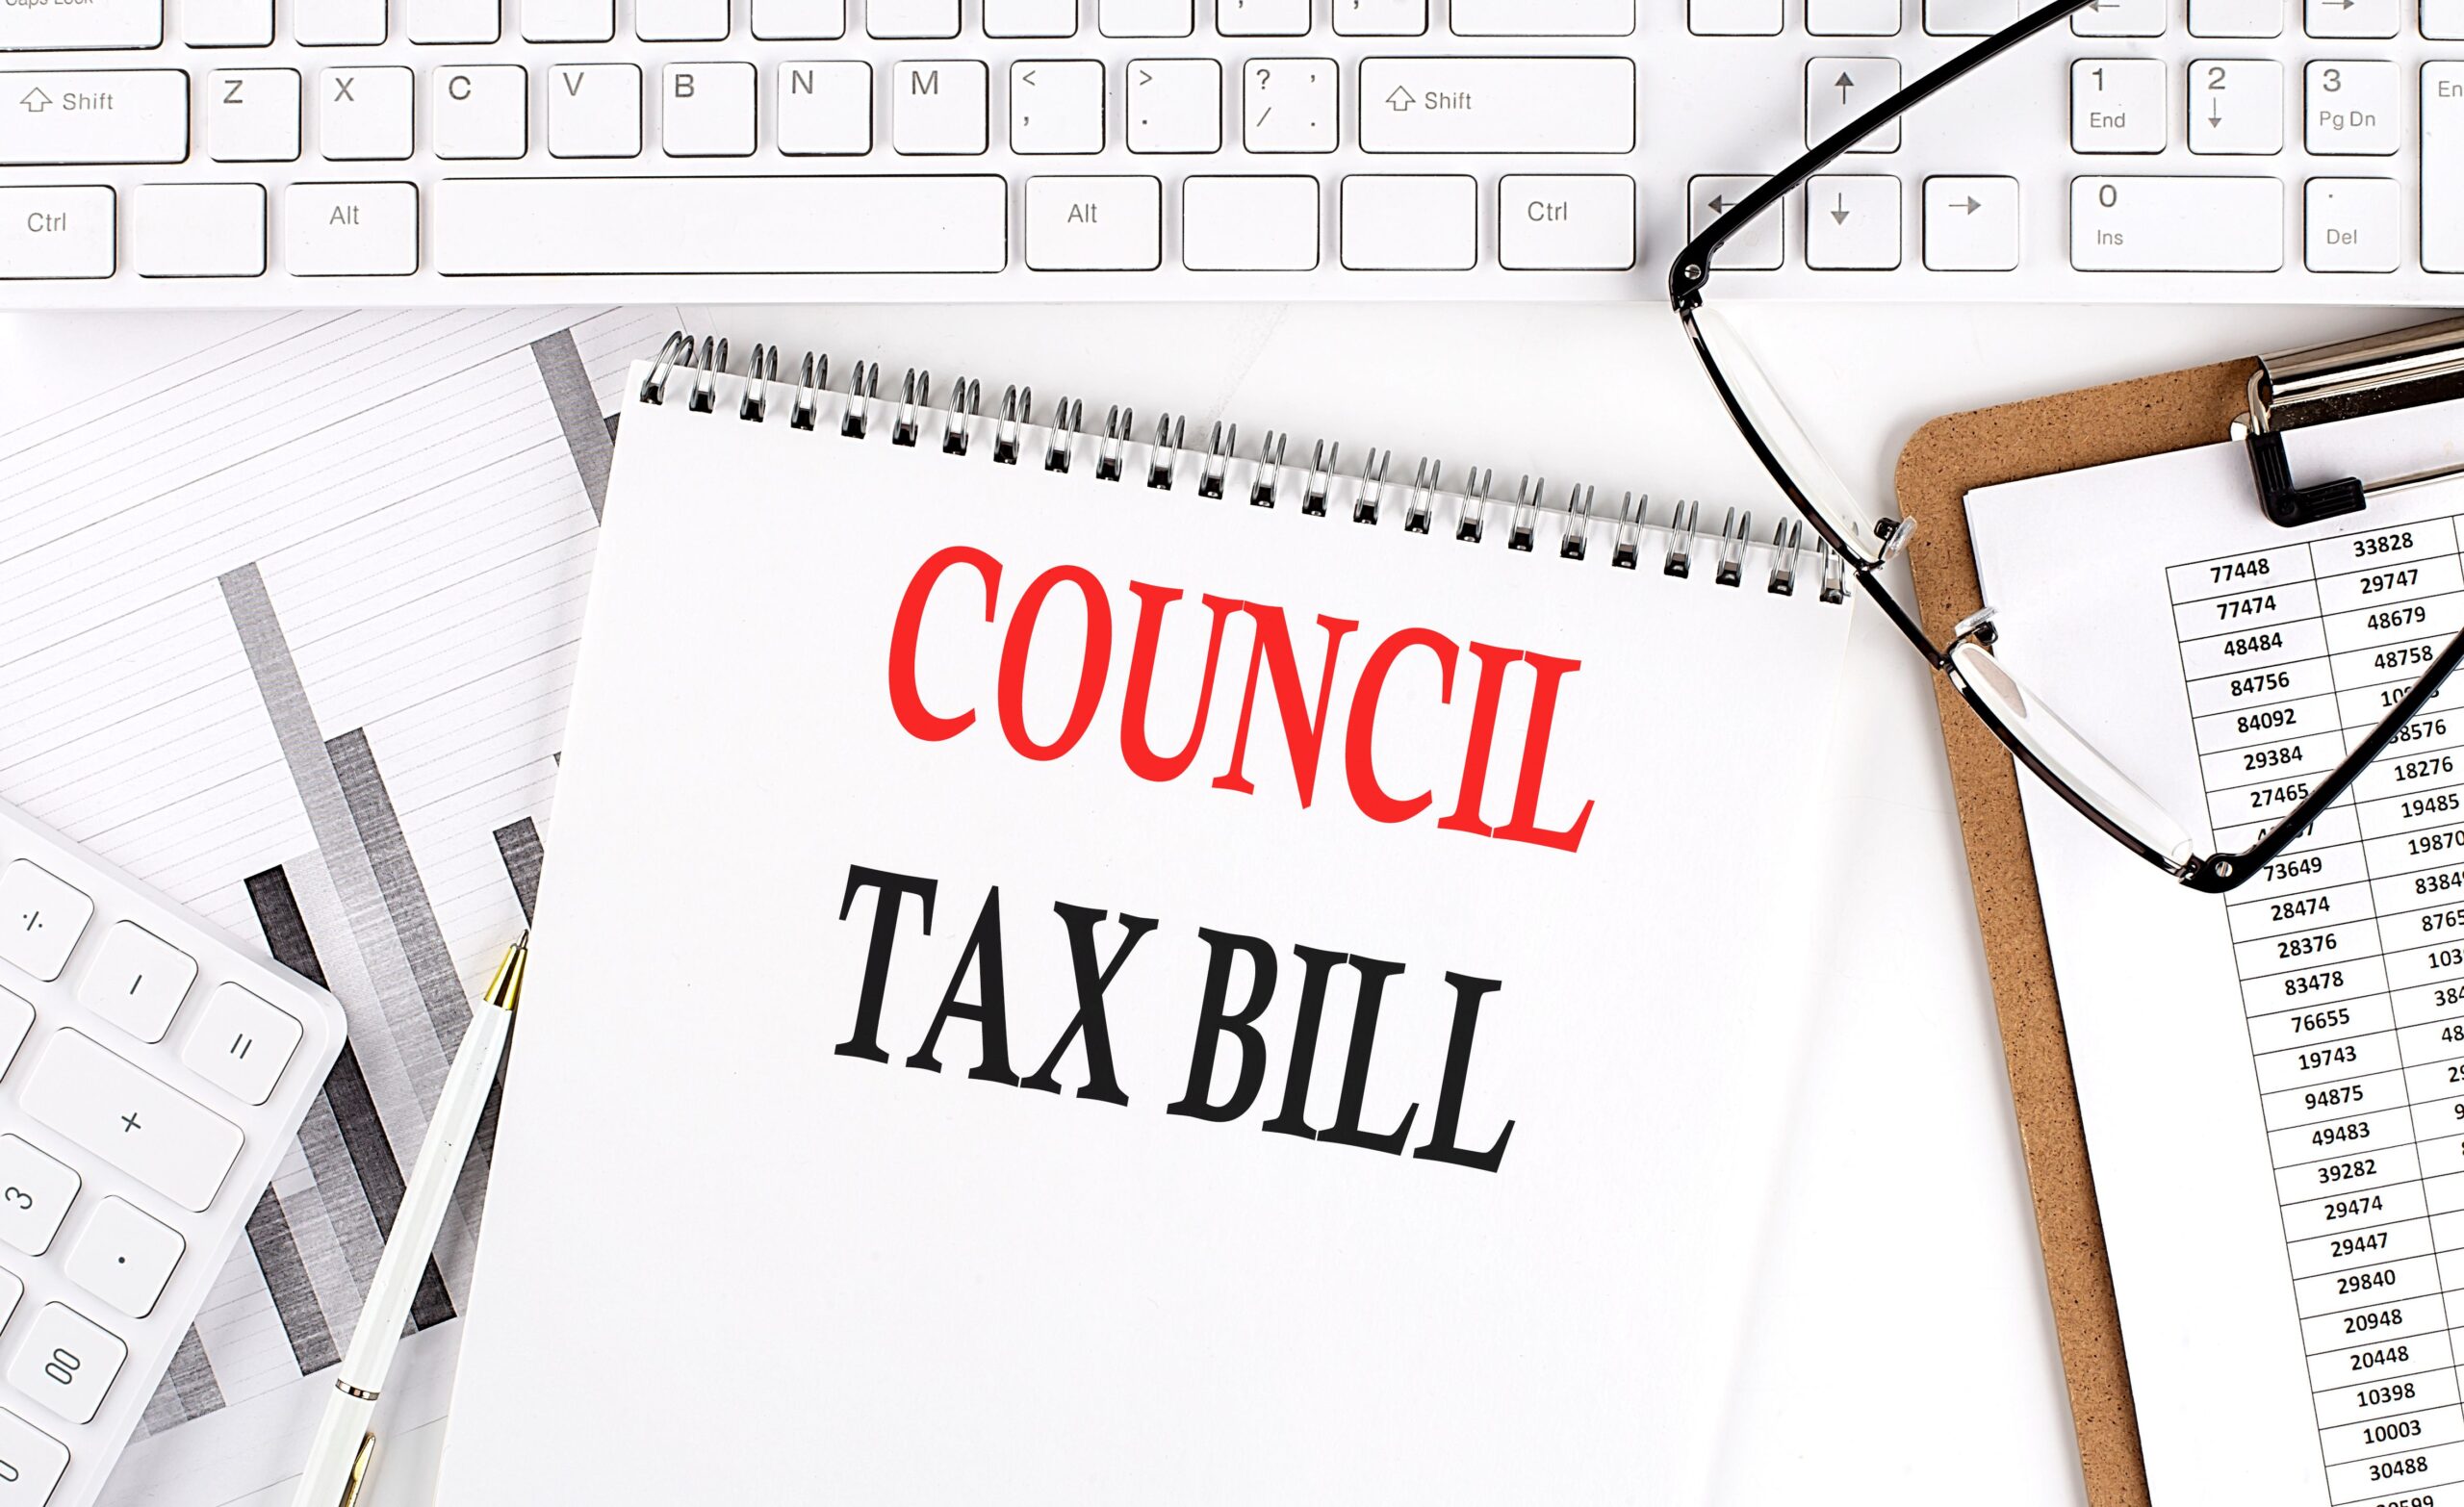 Council tax debt and IVA